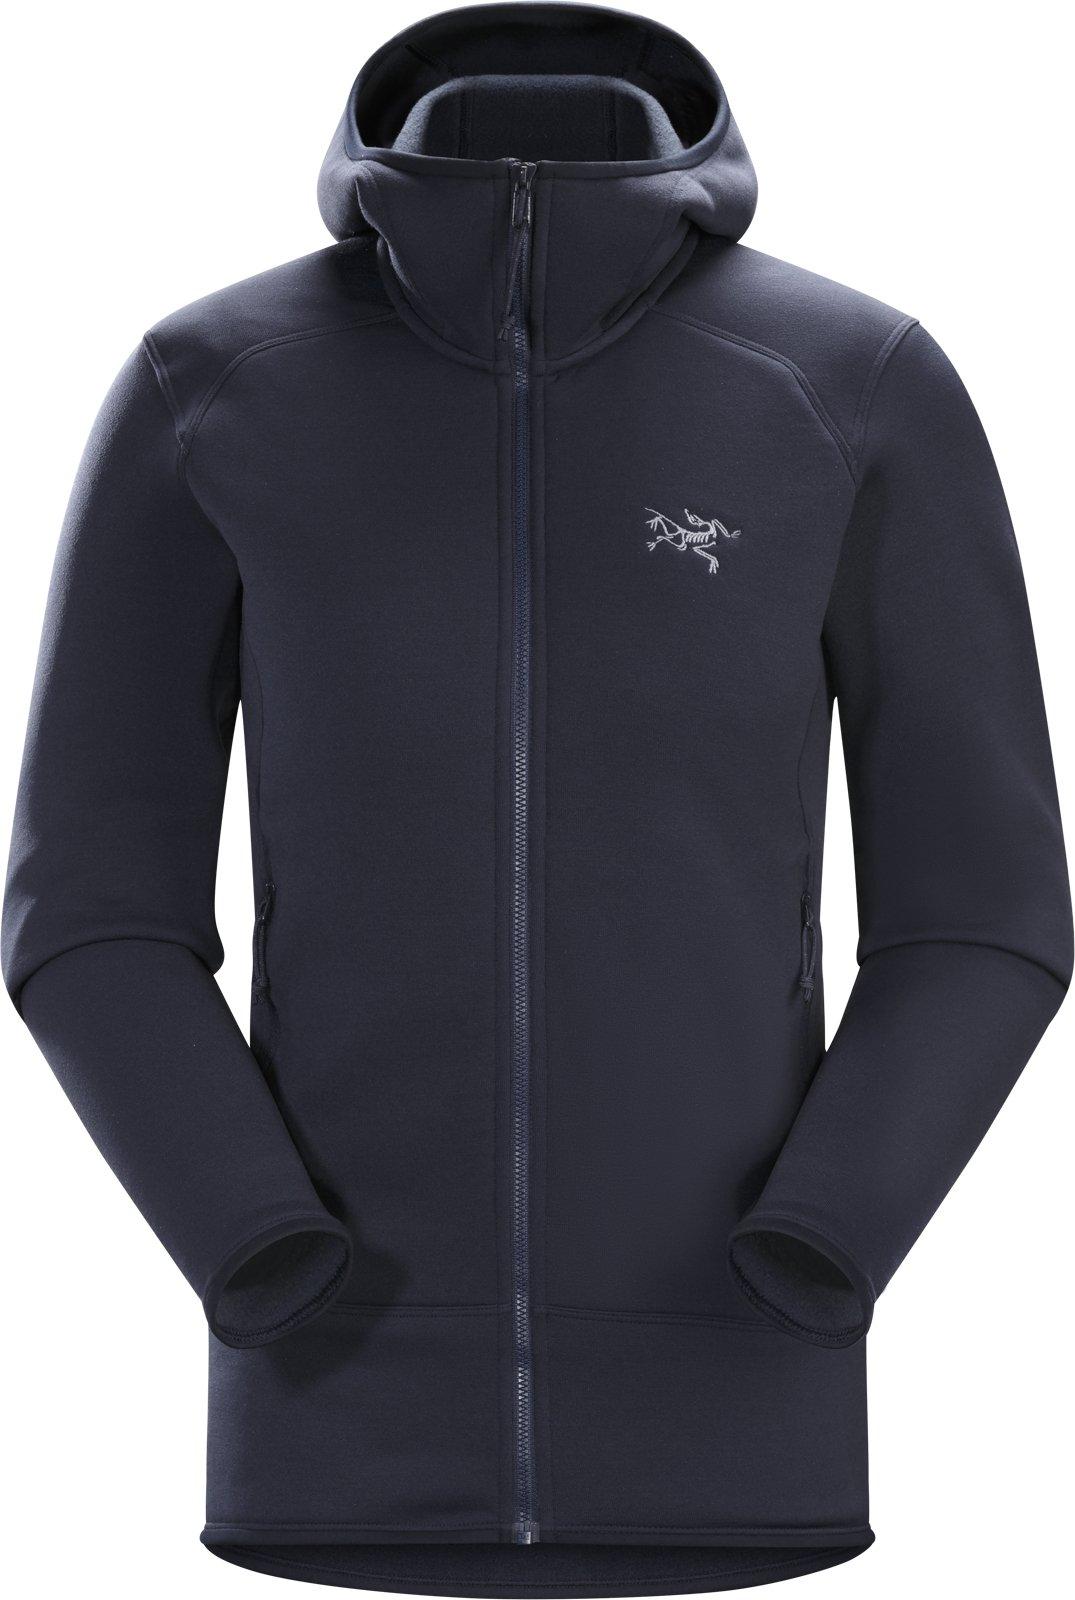 Arc'teryx Jackets, T Shirts, Clothing & Accessories